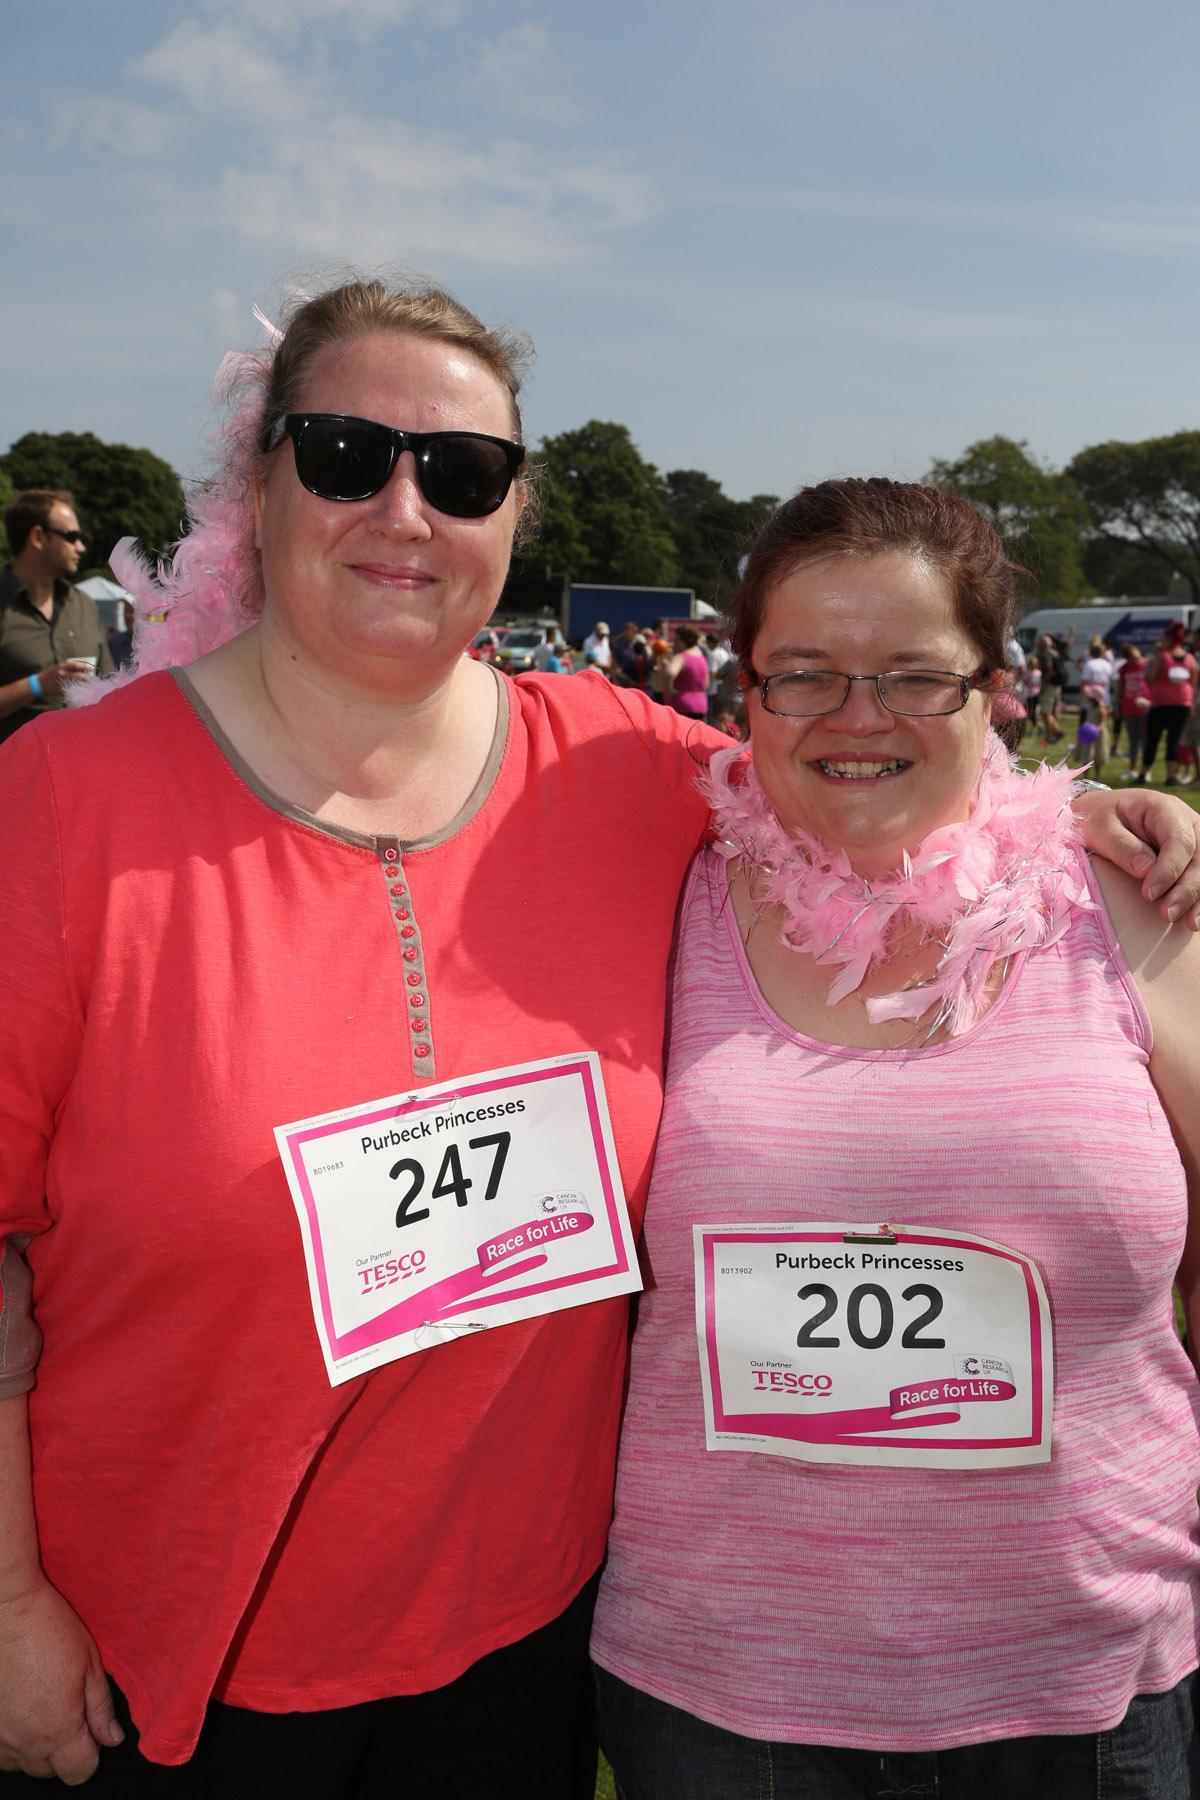 Pictures of the 5k AM and PM races from Poole Park Race For Life 2014